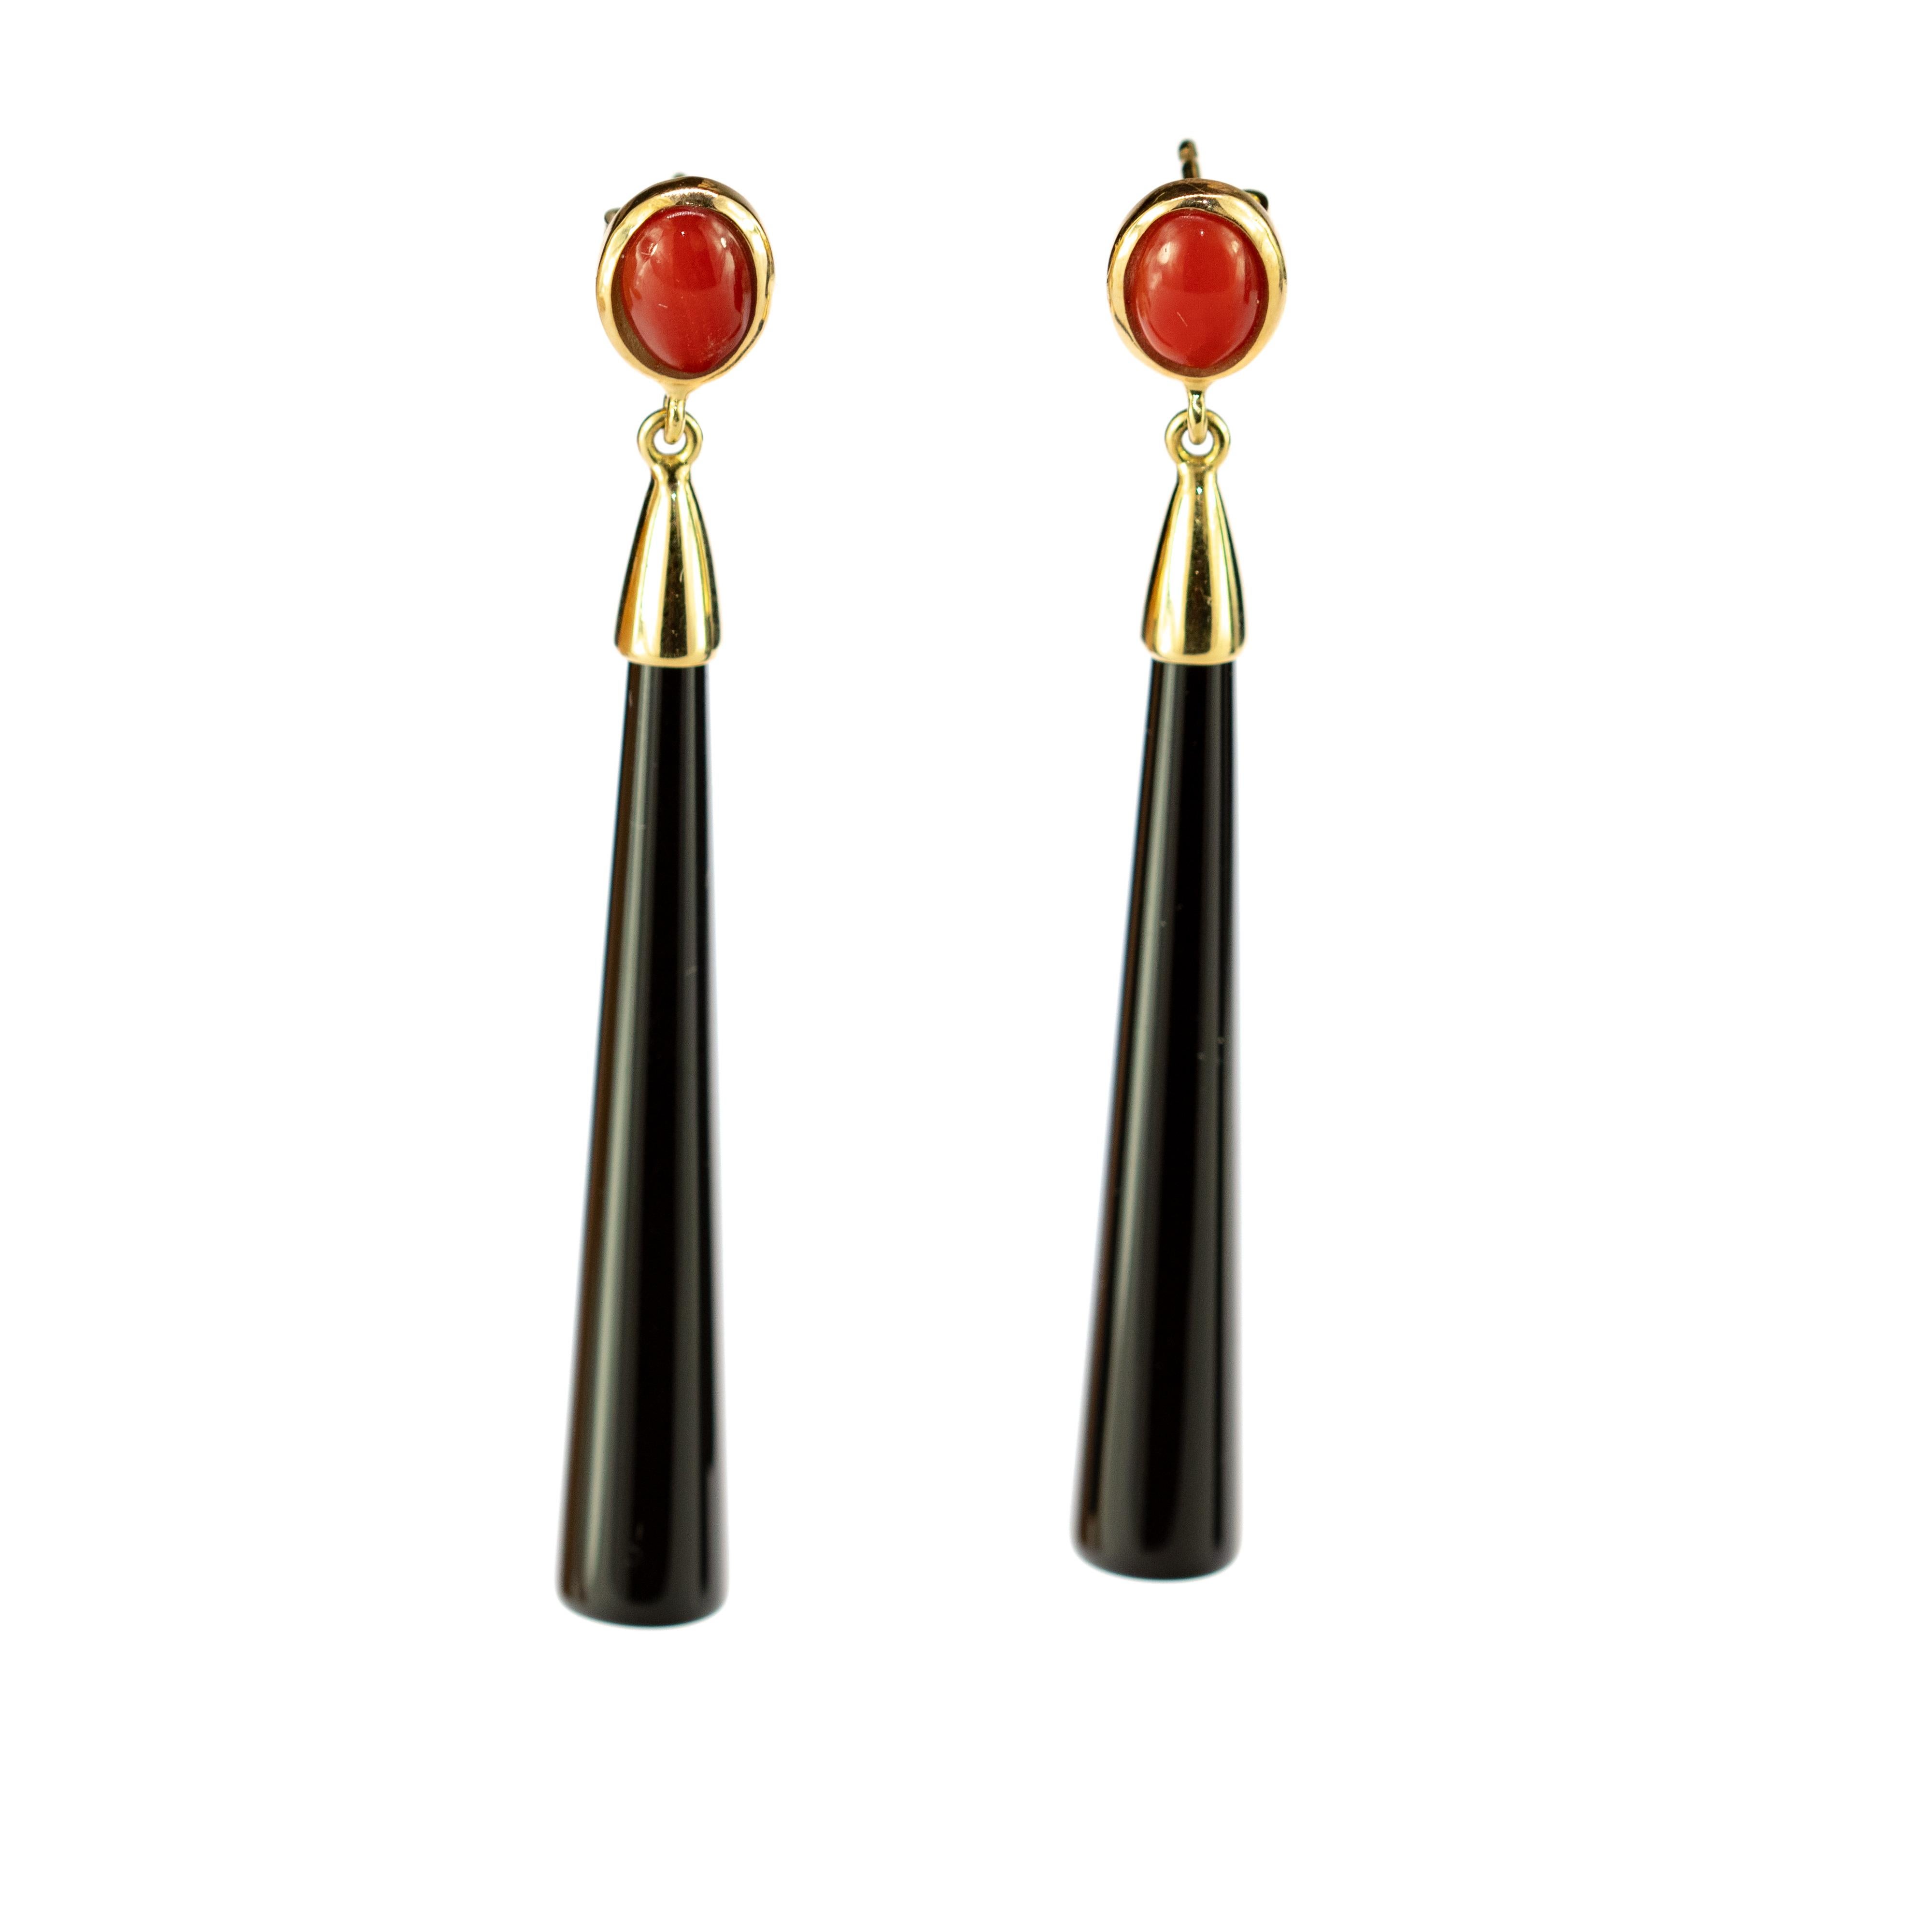 Stunning masterpiece with an outstanding display of color and a high quality craftsmanship was born in the Intini Jewels workshop. Stunning crafted cammeo redcoral and black agate drops earrings helded by delicate 18 karat white gold details.

These